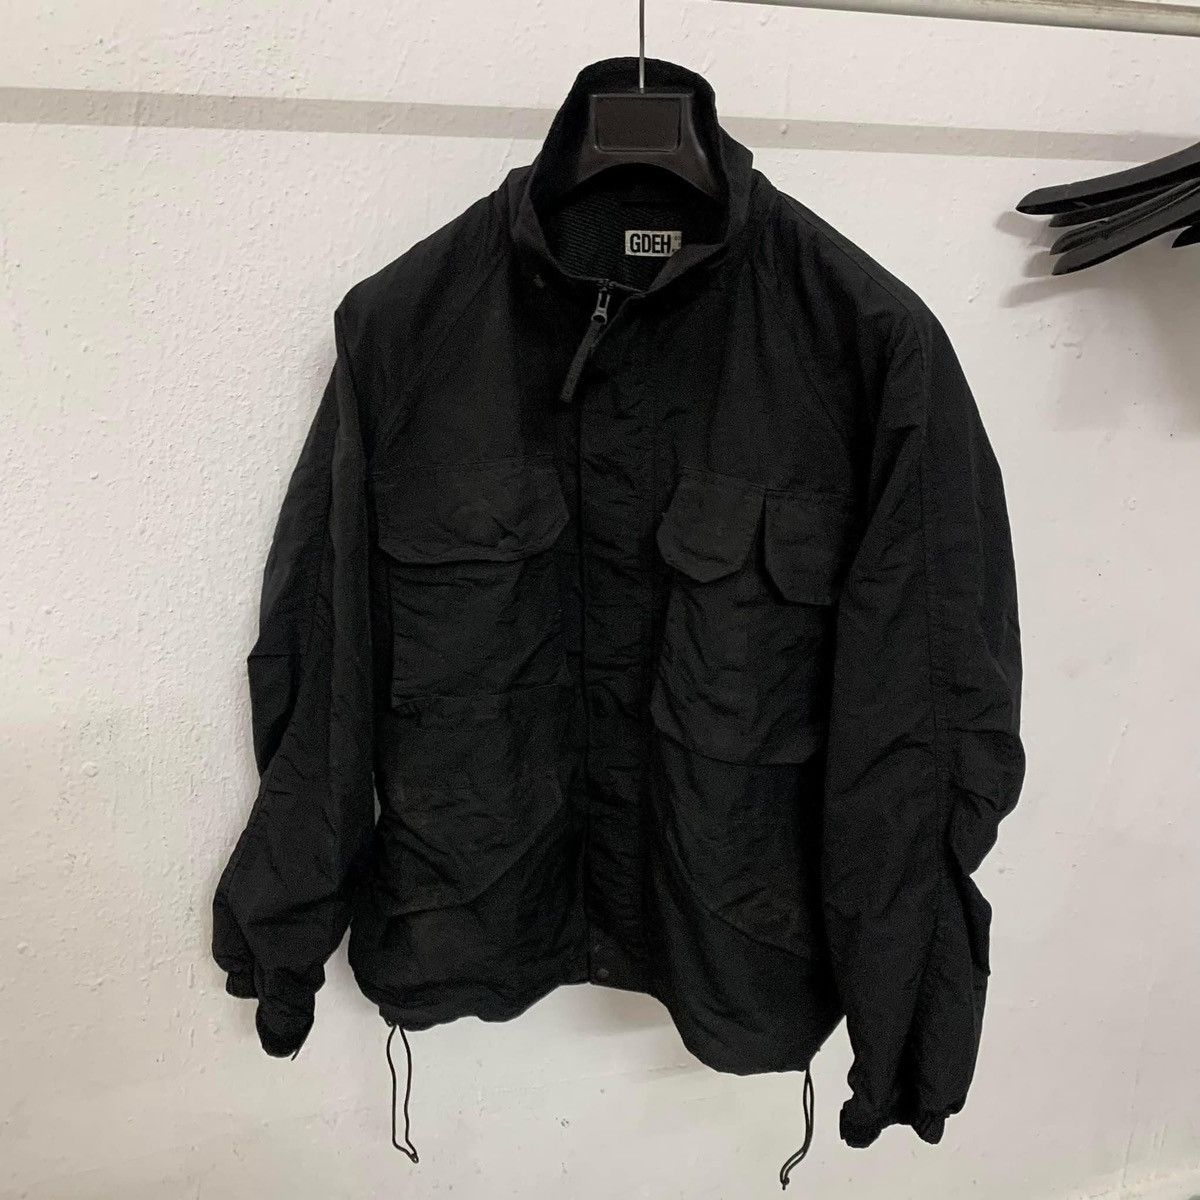 Goodenough ARCHIVED GOODENOUGH Tactical Multi-Pockets Jacket | Grailed